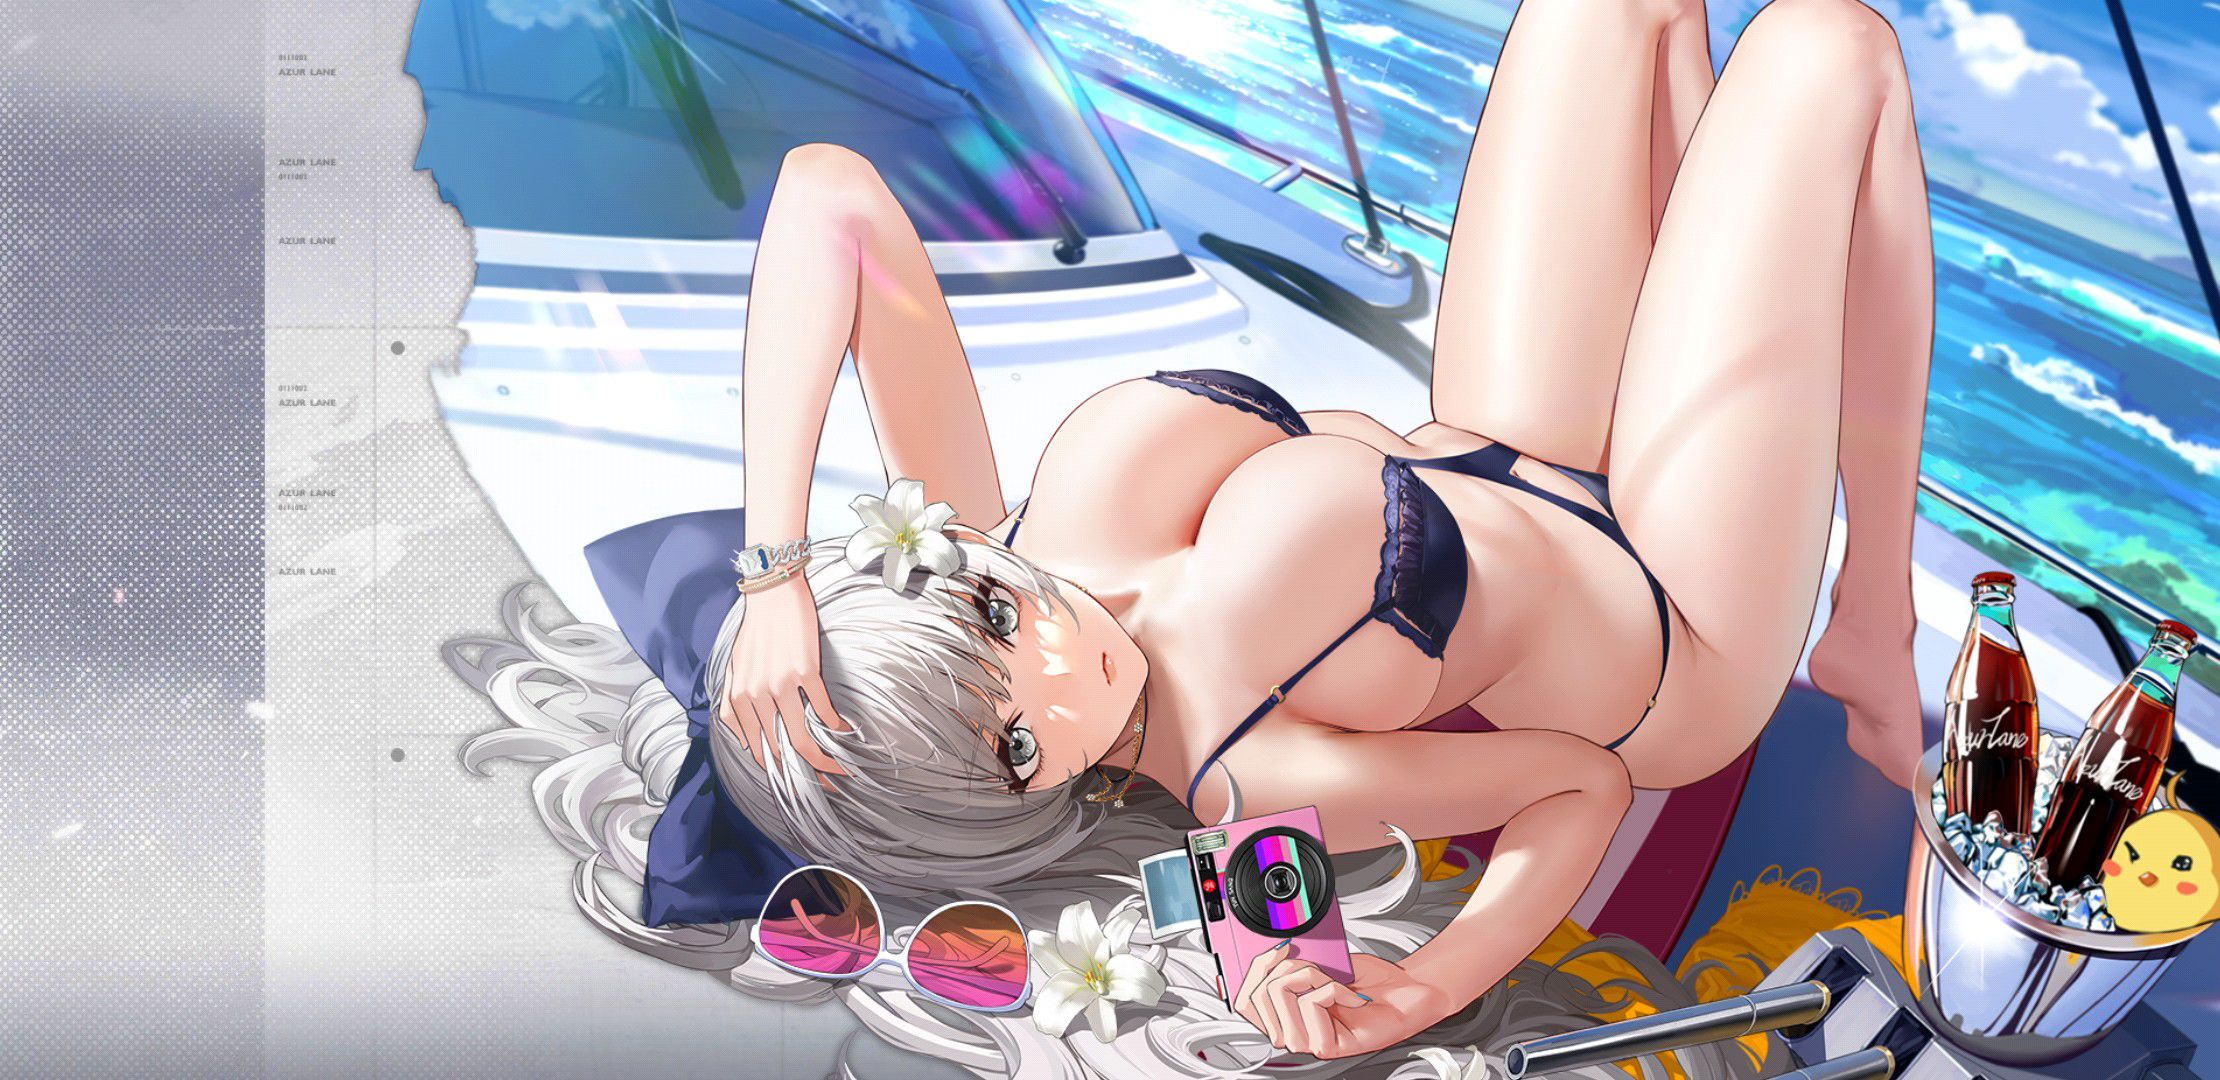 【There is an image】 Smartphone that urges charging with erotic swimsuits is malicious 31